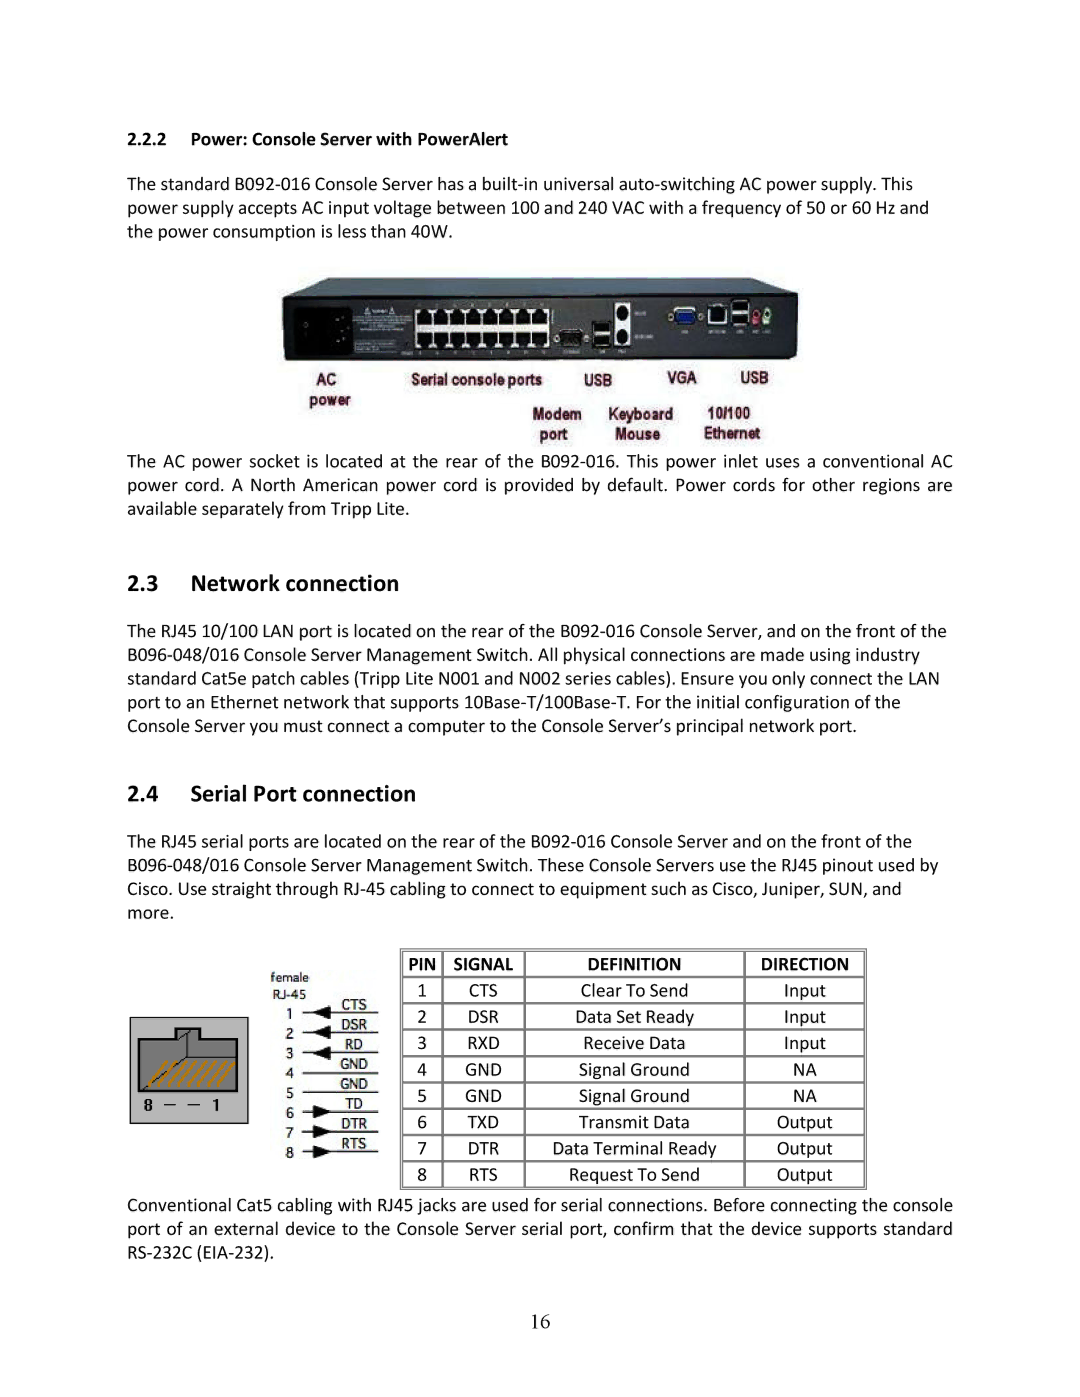 Tripp Lite B096-048, 93-2879, B096-016 Network connection, Serial Port connection, Power Console Server with PowerAlert 